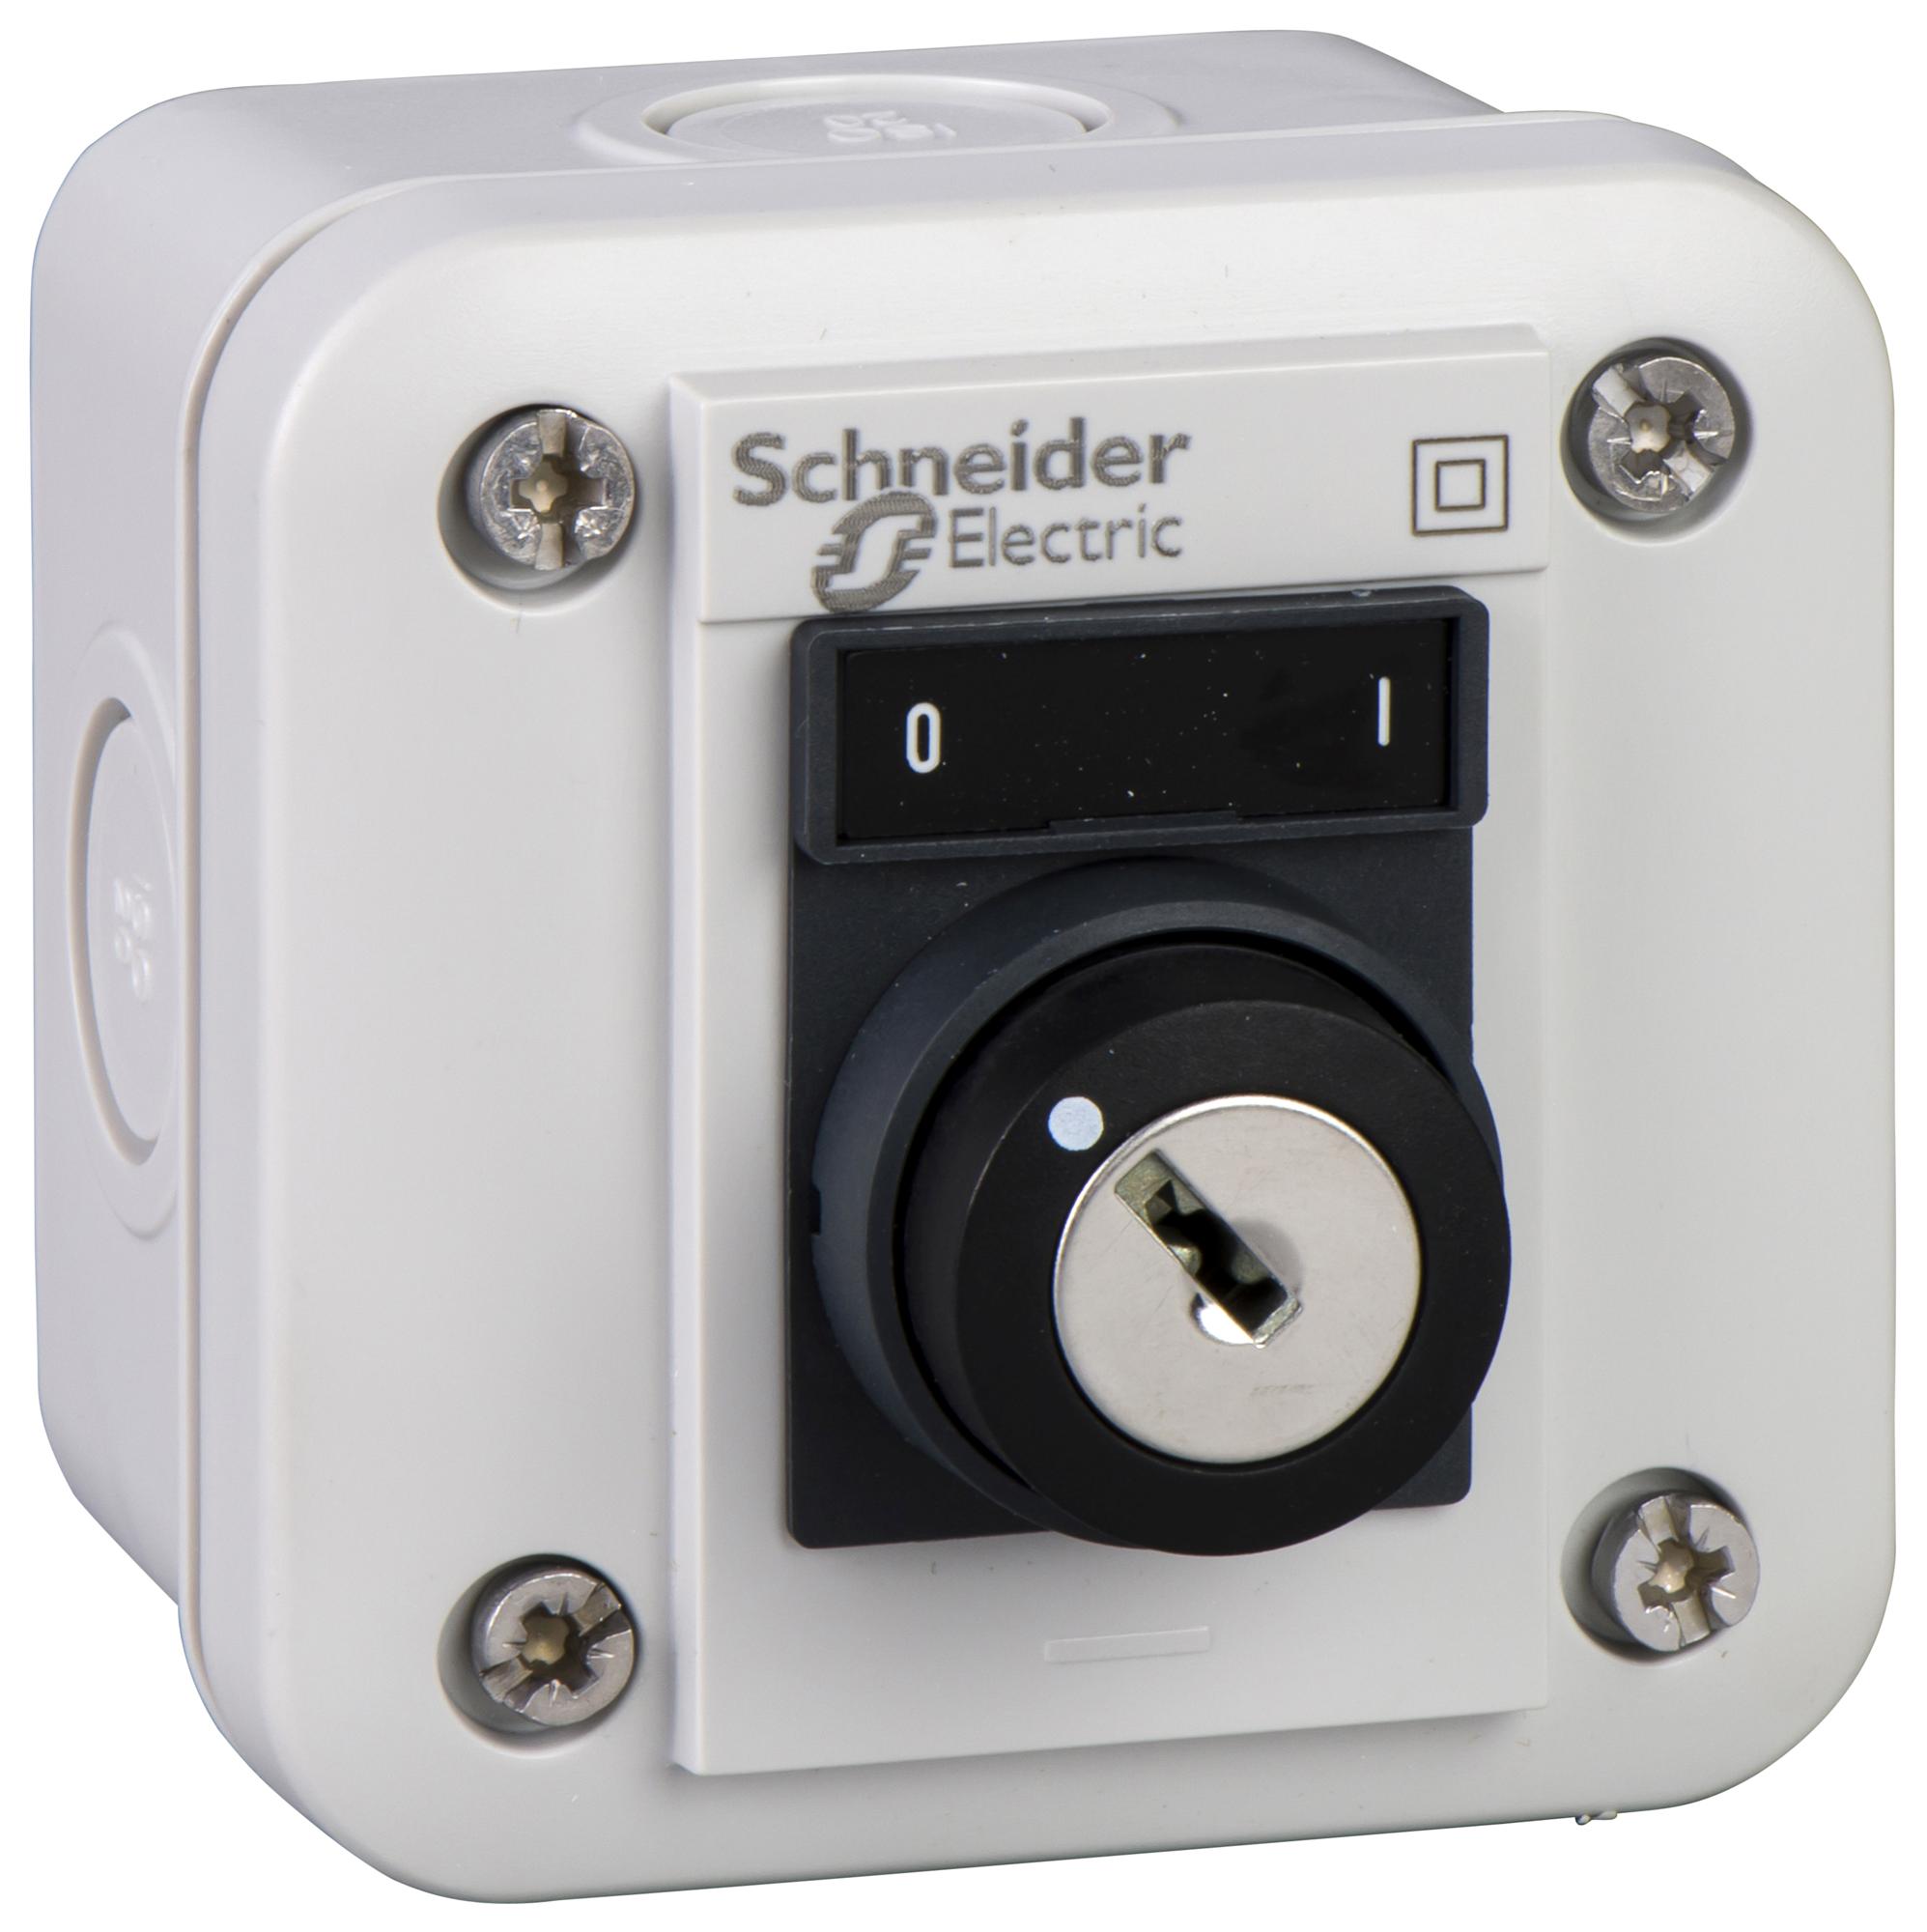 XALE1441 KEY OPERATED SWITCH, SPST-NO, 0.6A, 120V SCHNEIDER ELECTRIC